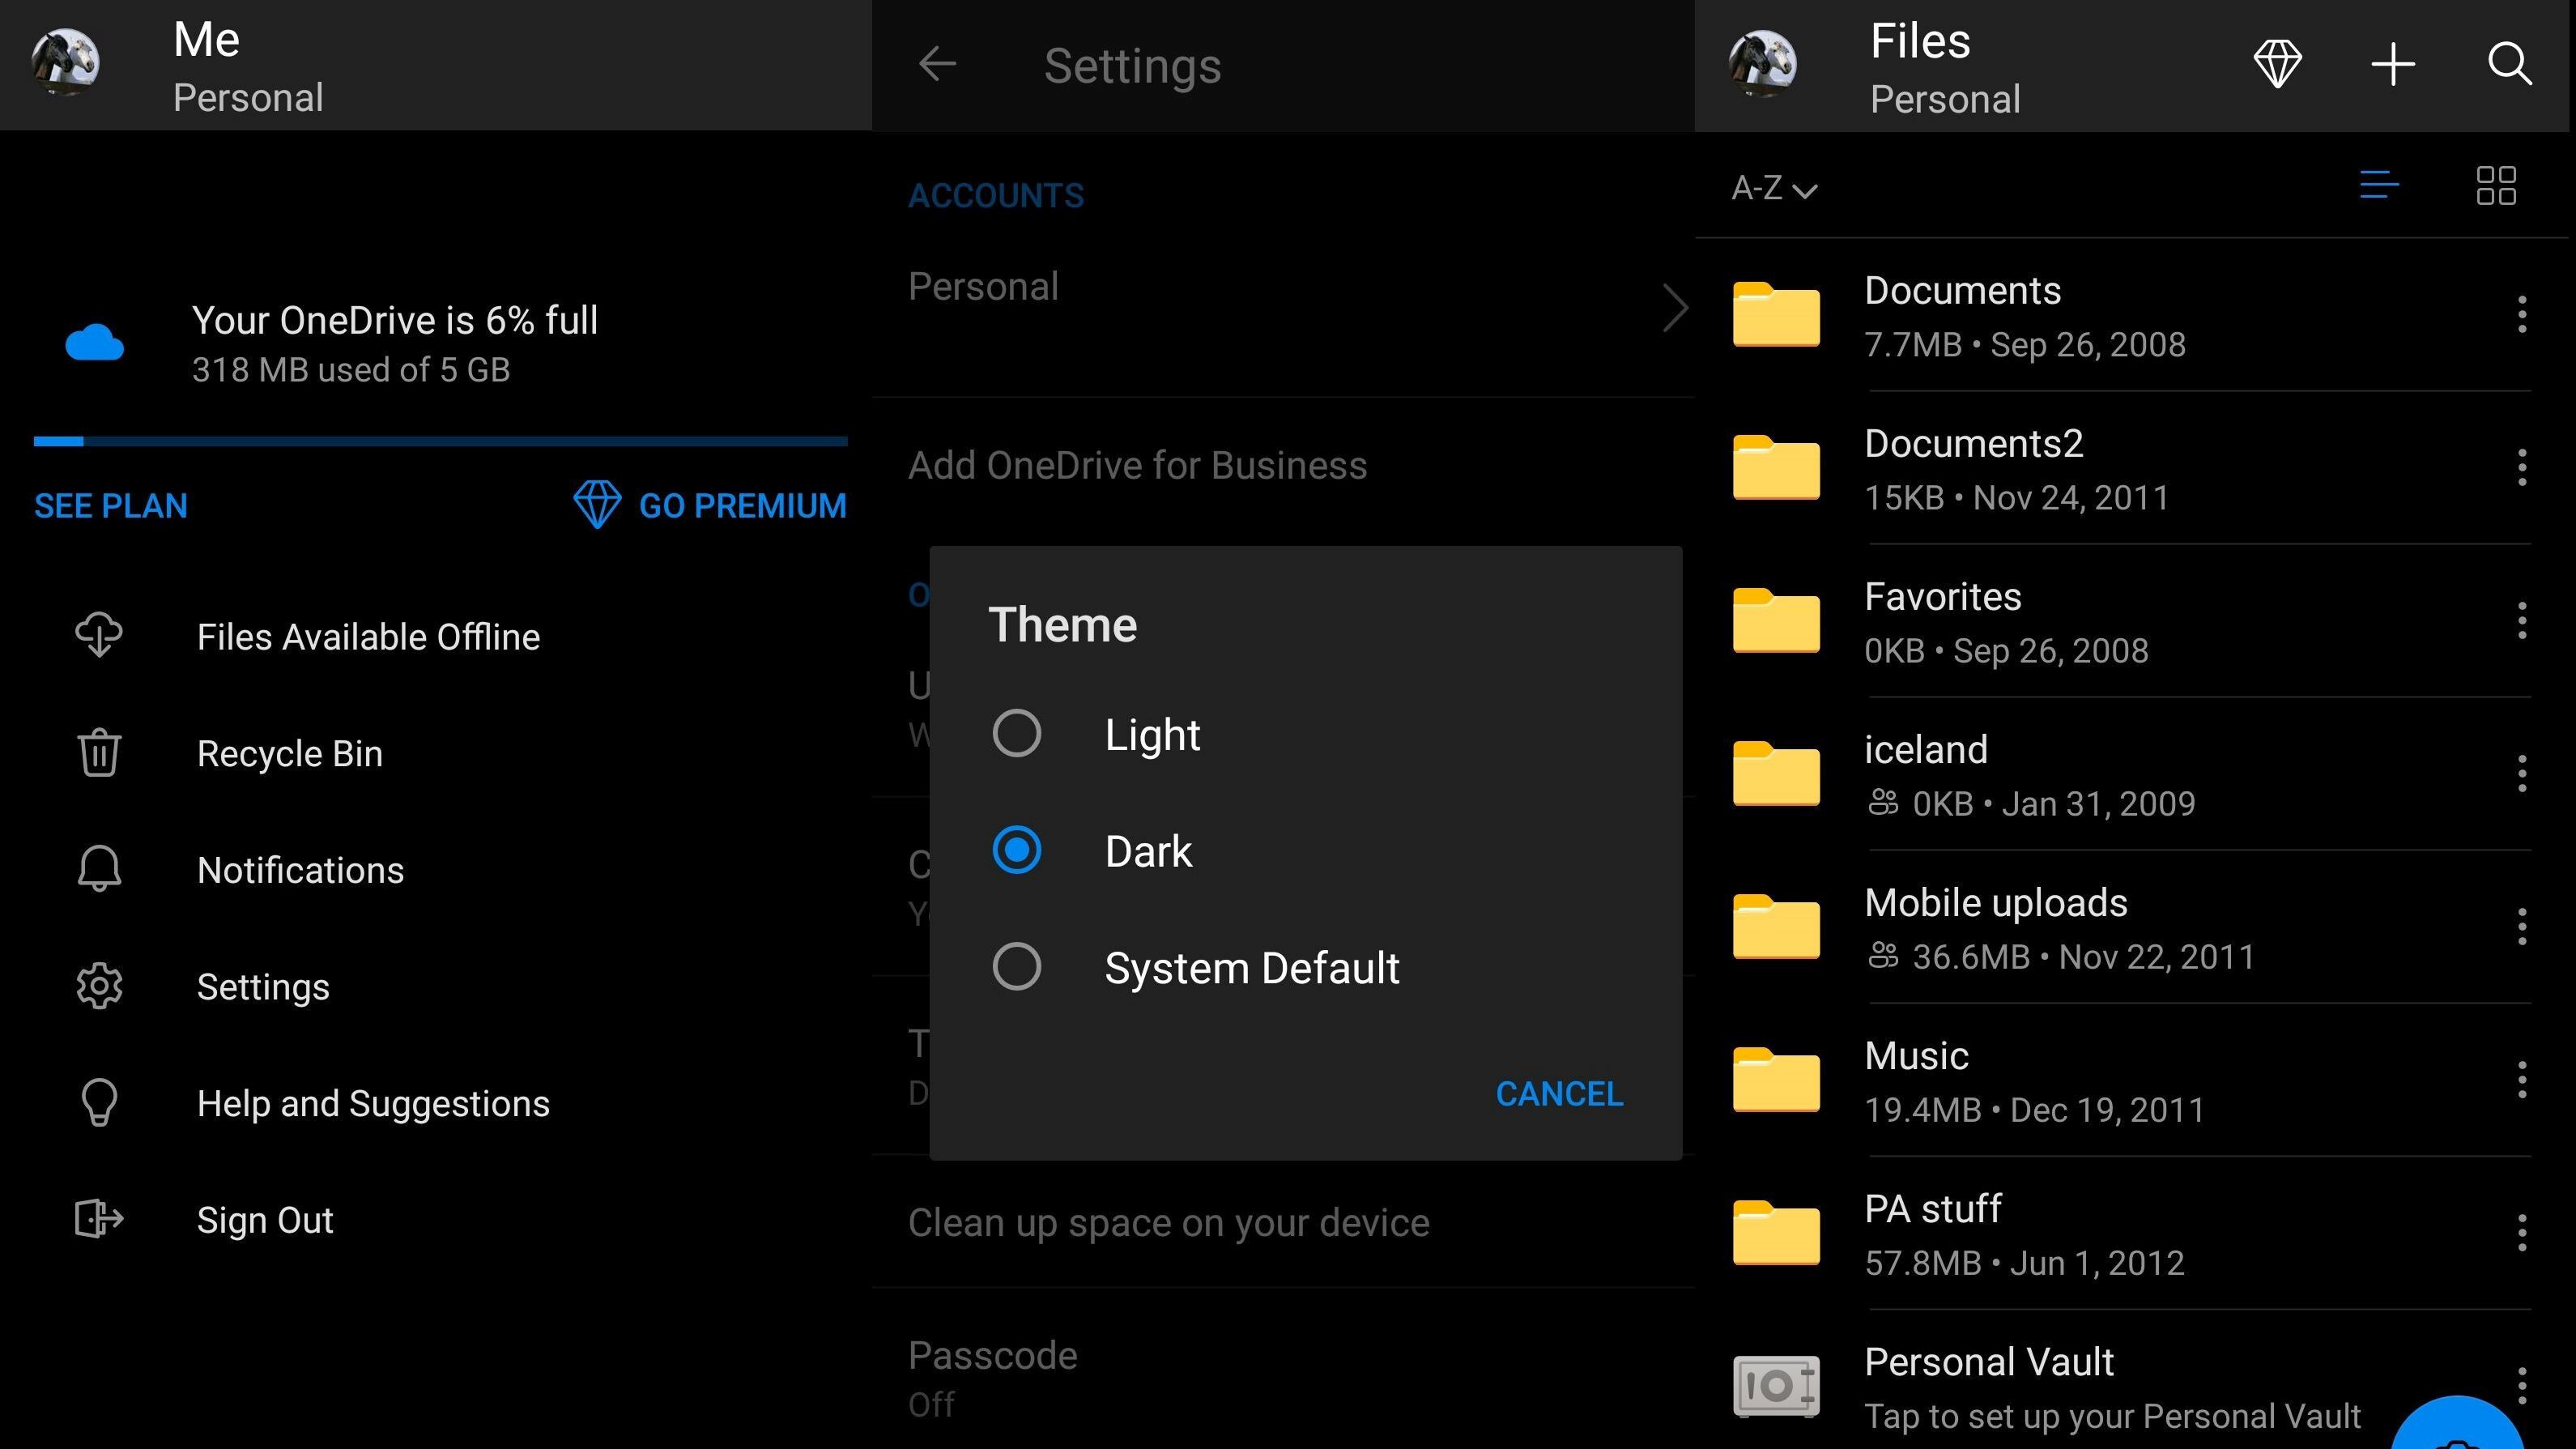 Dark Mode On Android Phones Extends BatteryLife | EVB Technology